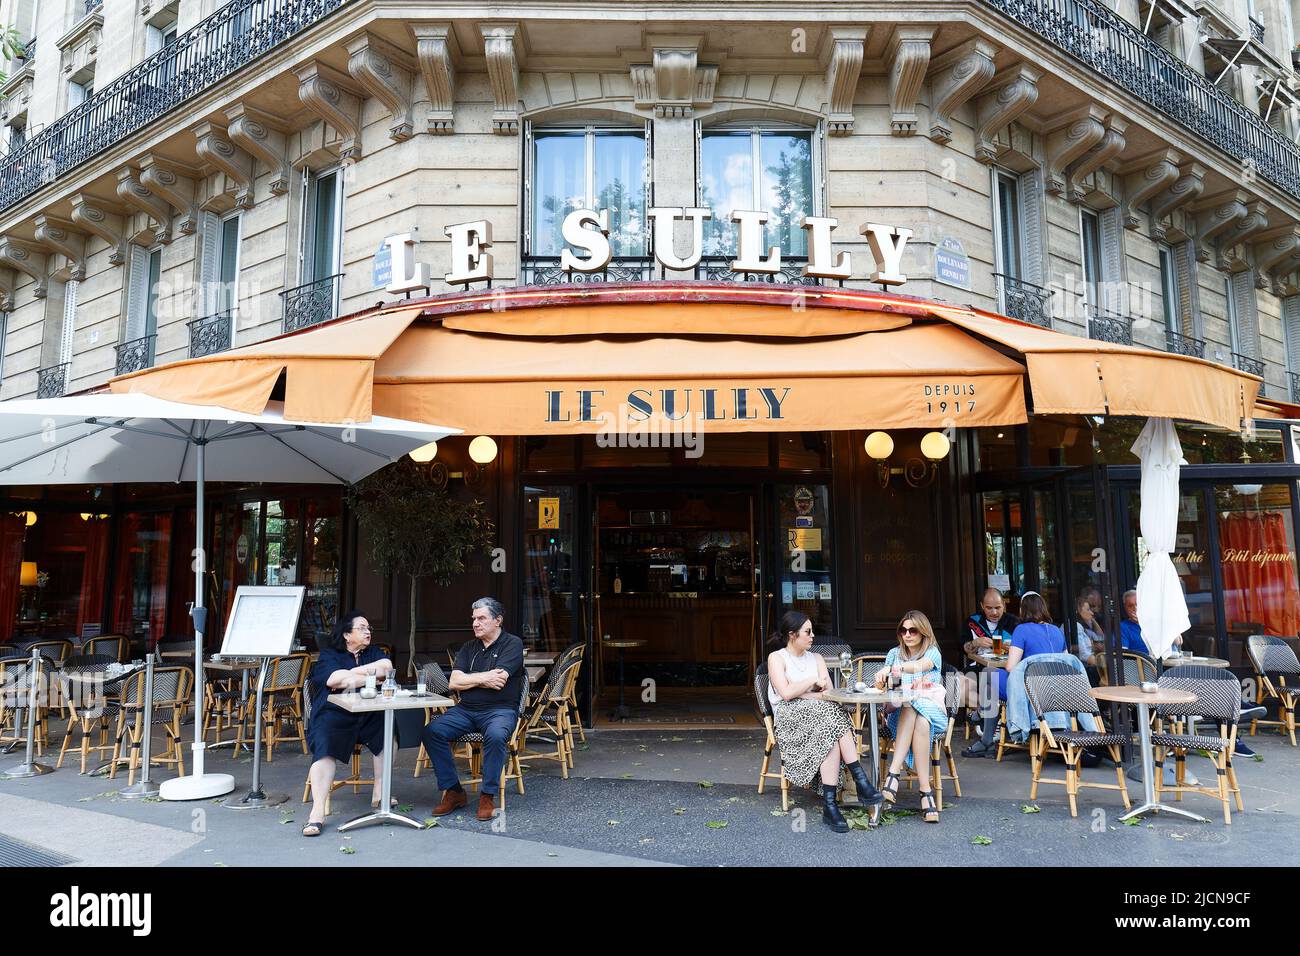 The traditional French cafe Le Sully is a familial brasserie since 1917 located at boulevard Henri IV in 4th arrondissement of Paris. Stock Photo